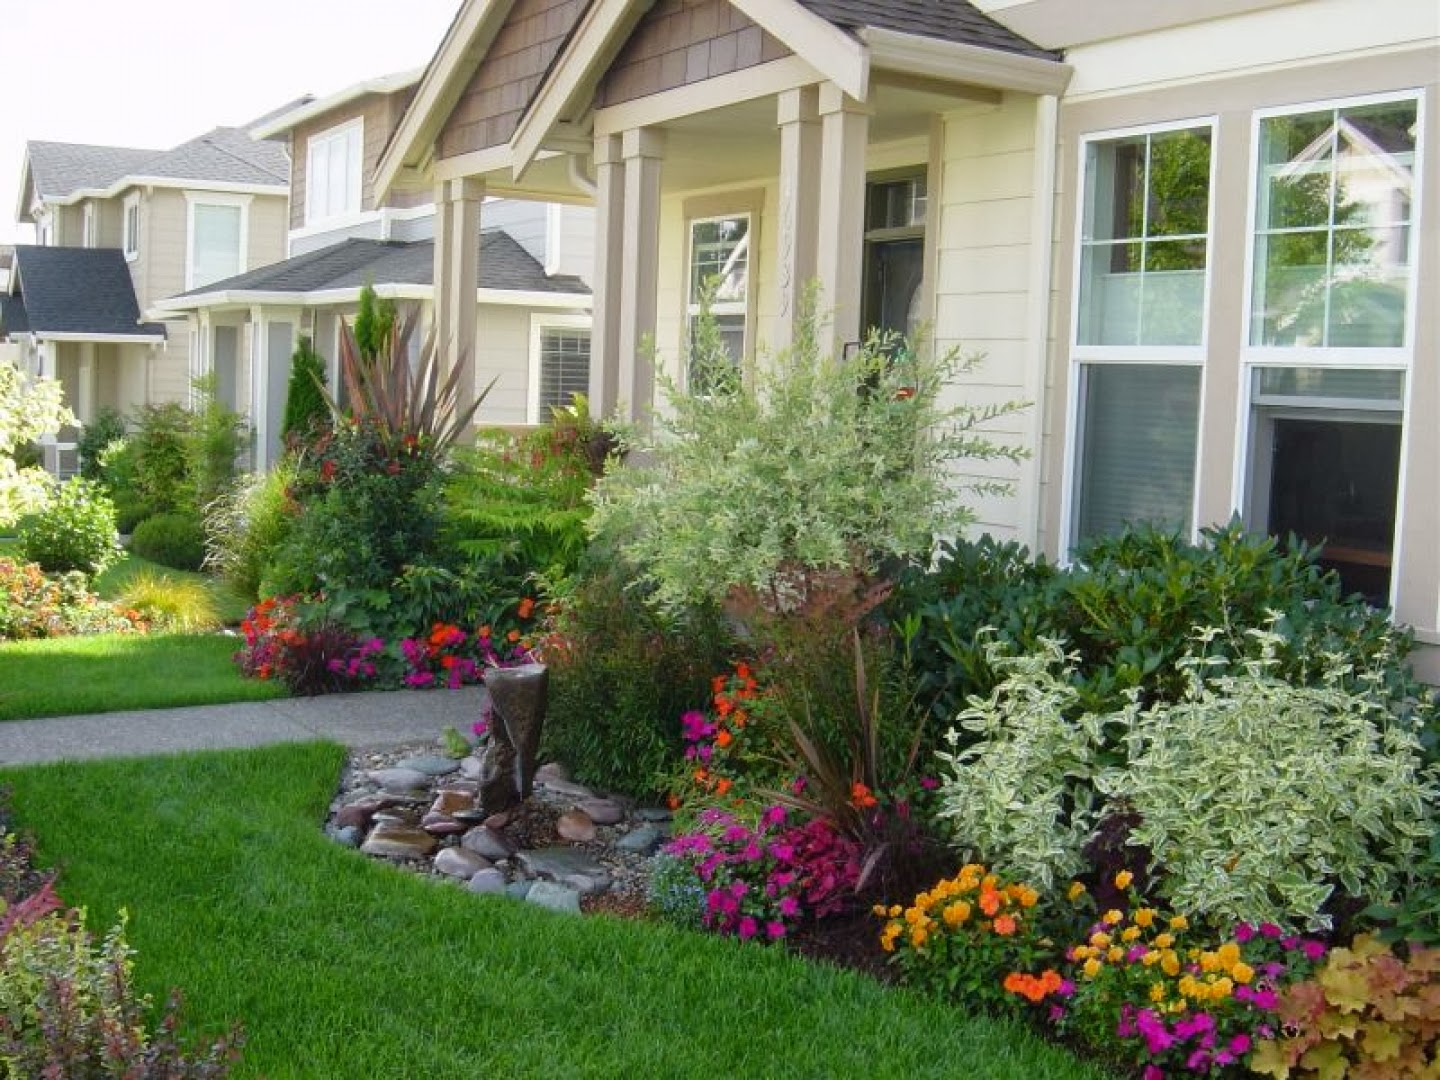 19 Amazing Small Front Yard Landscaping Ideas - Pelfind